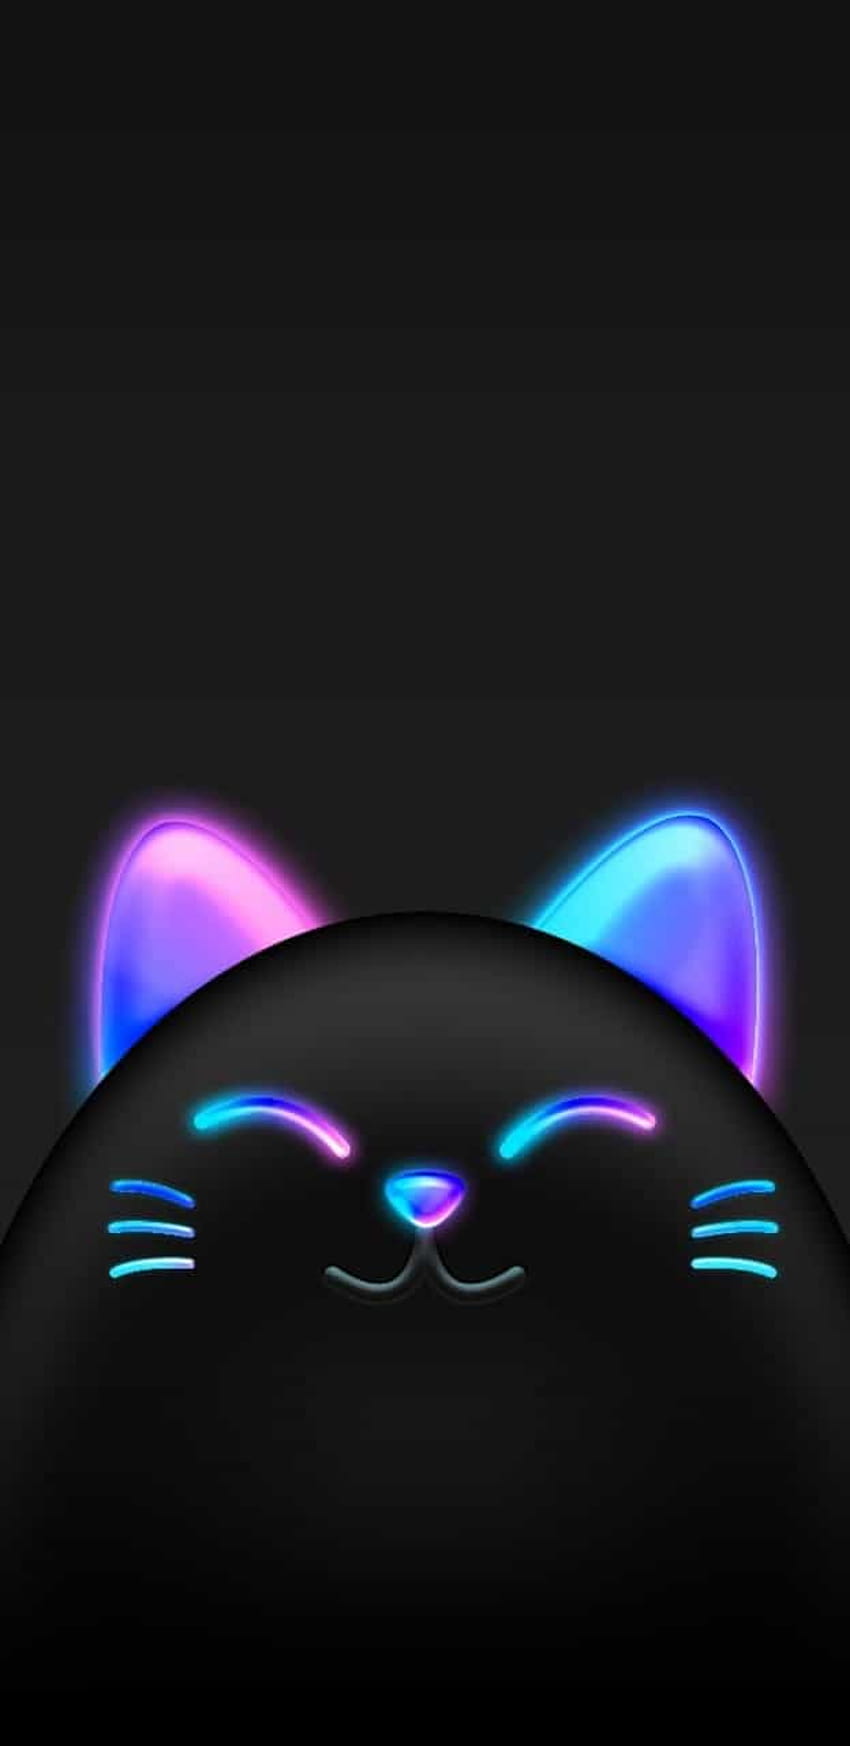 Free Neon Kitty Wallpaper For Your Phone pets animals wallpaper  wallpapers android iphone ne  Neon wallpaper Unicorn wallpaper cute  Iphone wallpaper cat